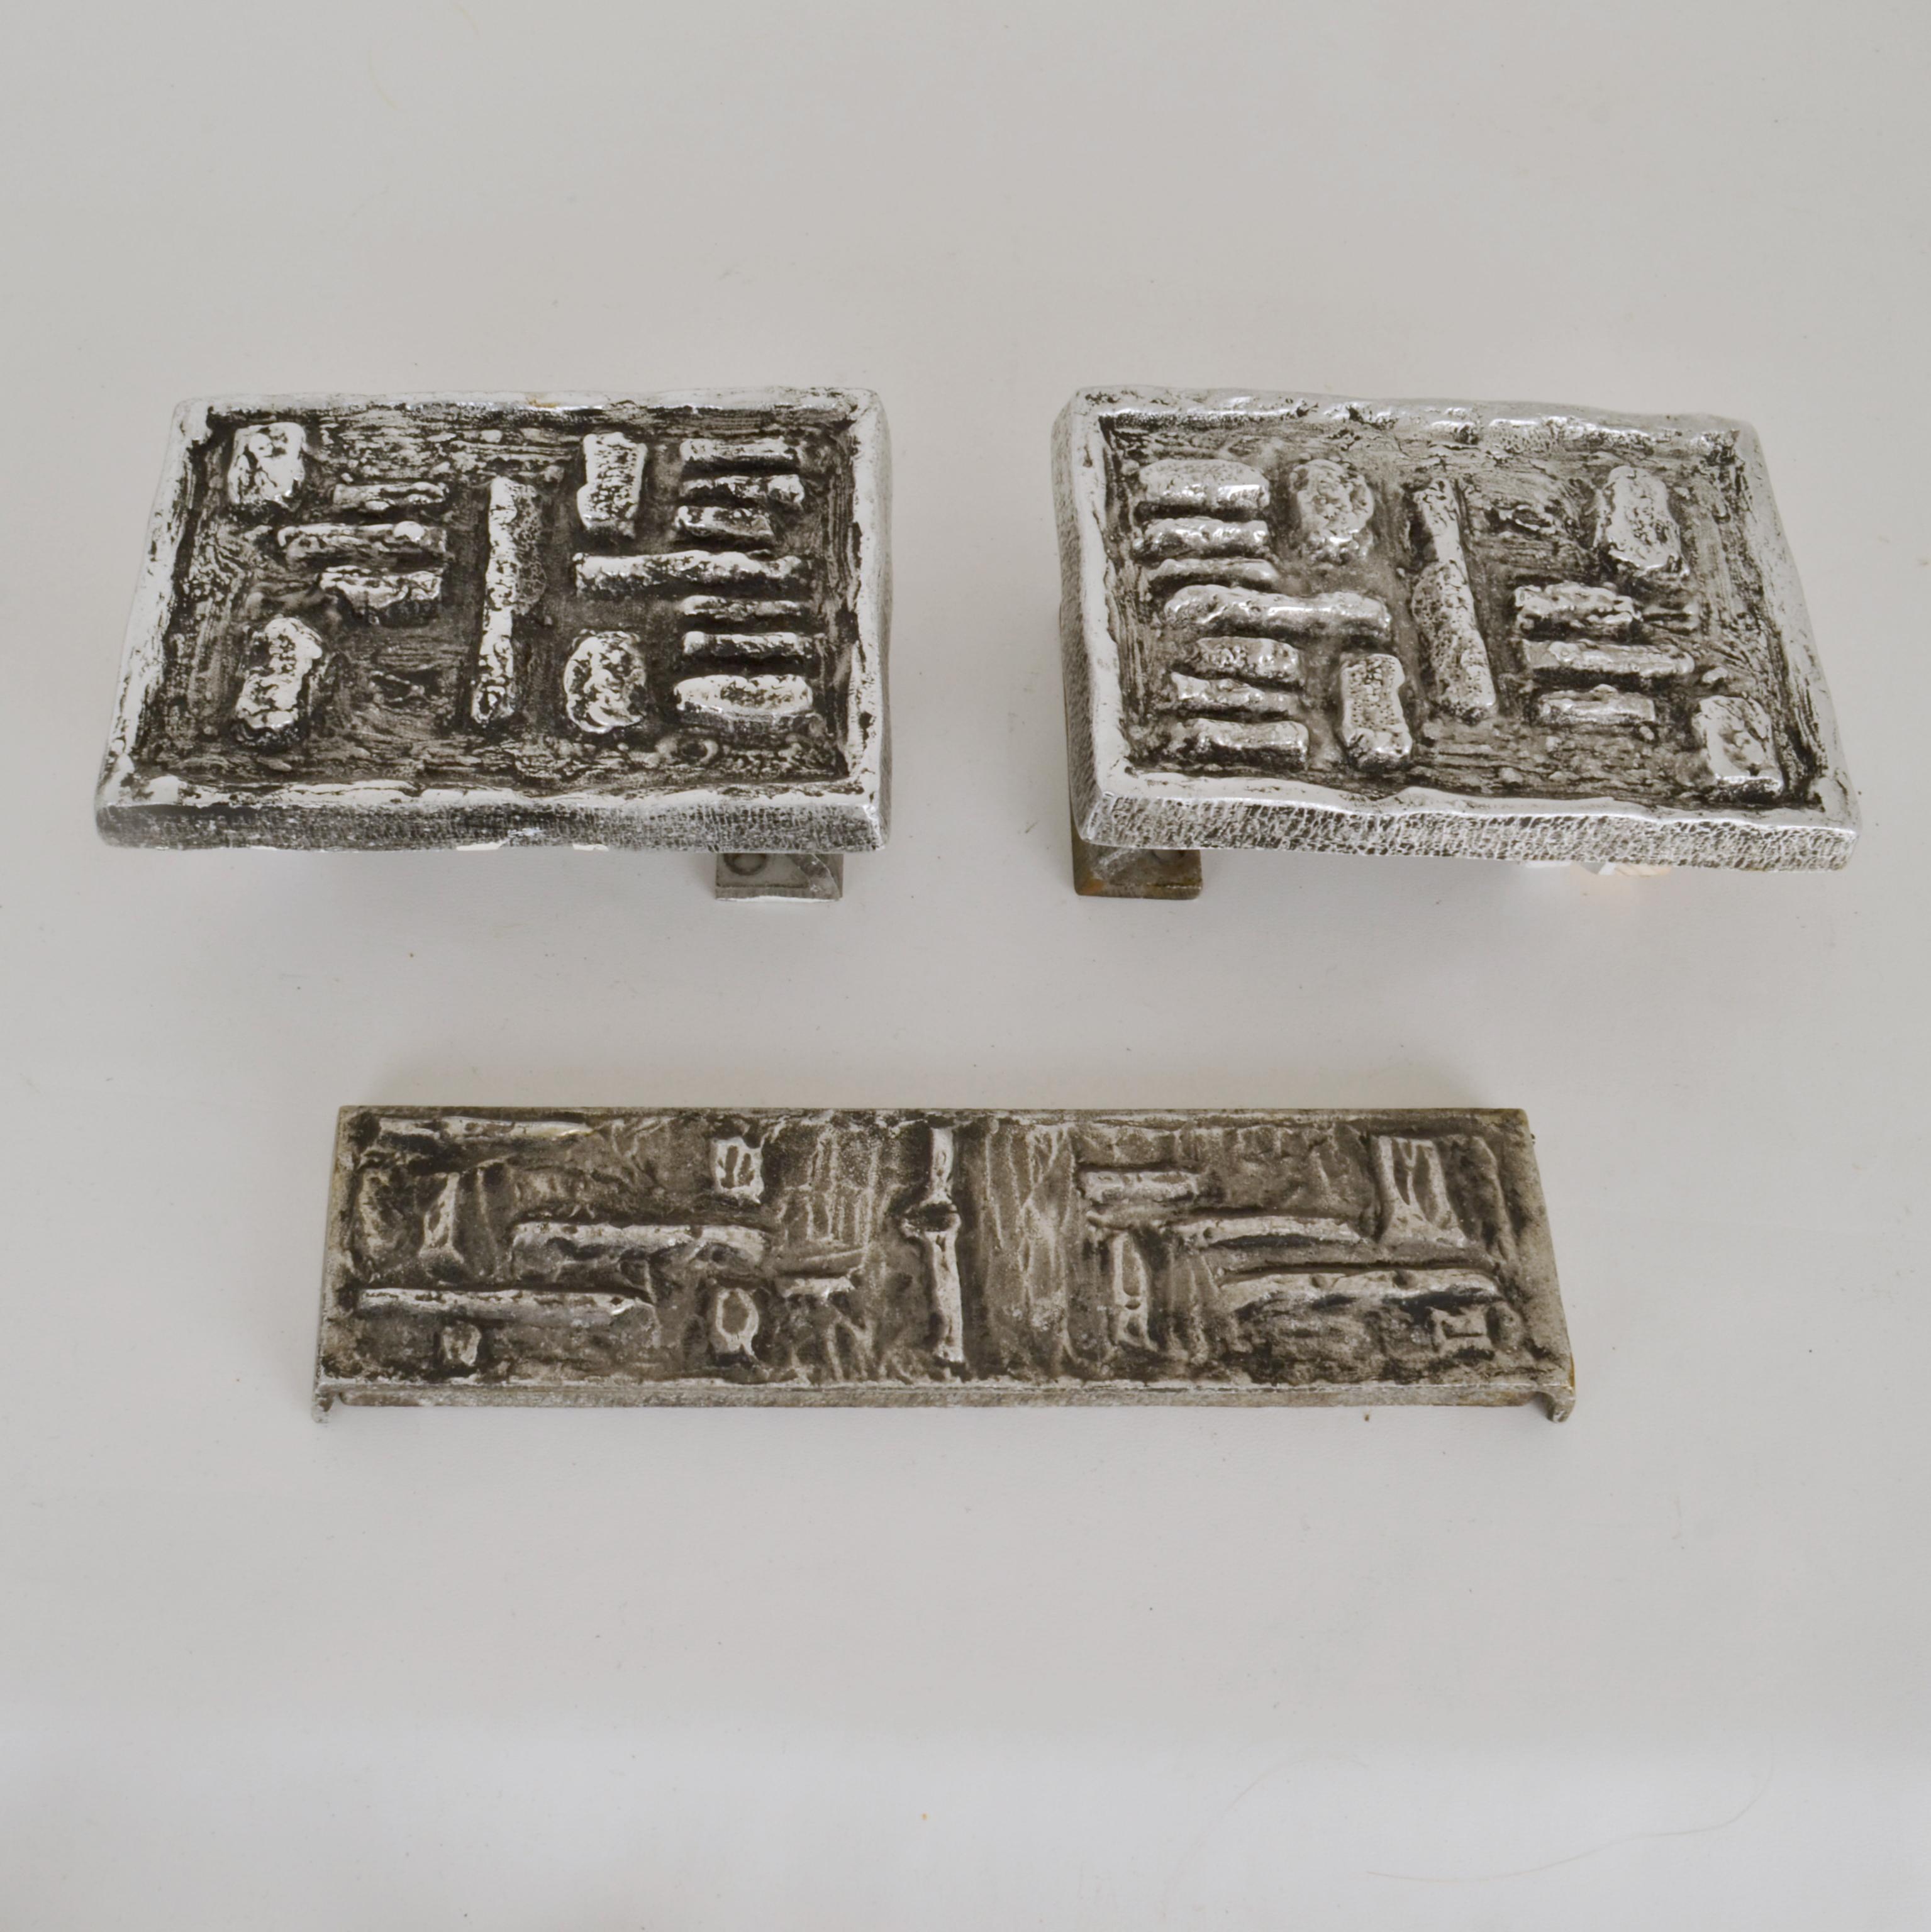 Pair of Brutalist rectangular push and pull door handles and letterbox with relief of angled squares and rectangles. Cast in aluminum with a polished texture to the top surface and nice patina in the deep areas. The design works on both exterior and